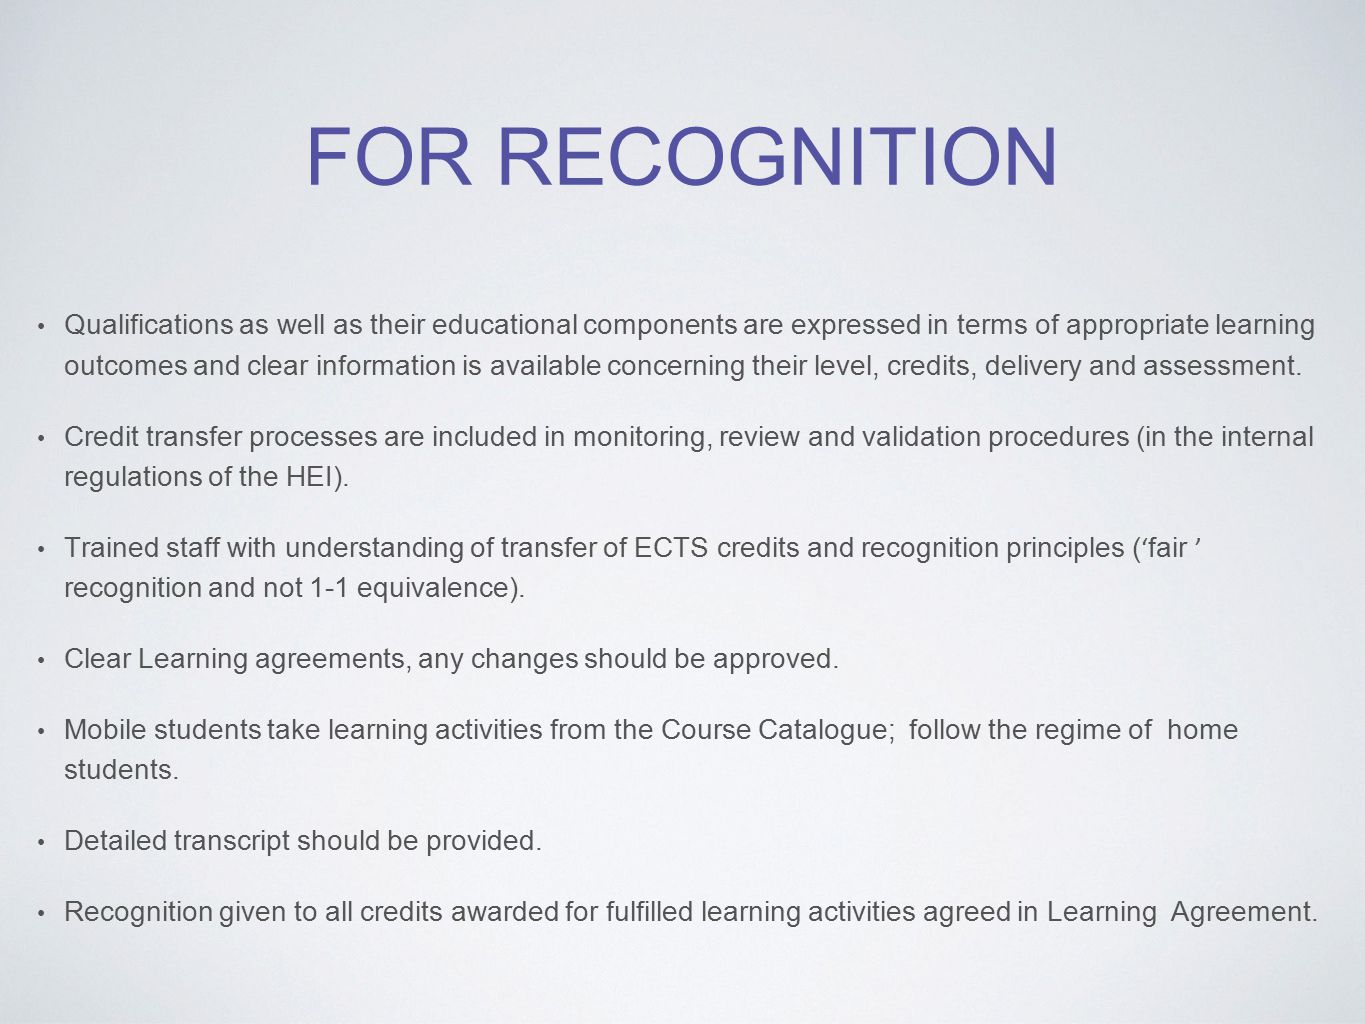 FOR RECOGNITION Qualifications as well as their educational components are expressed in terms of appropriate learning outcomes and clear information is available concerning their level, credits, delivery and assessment.